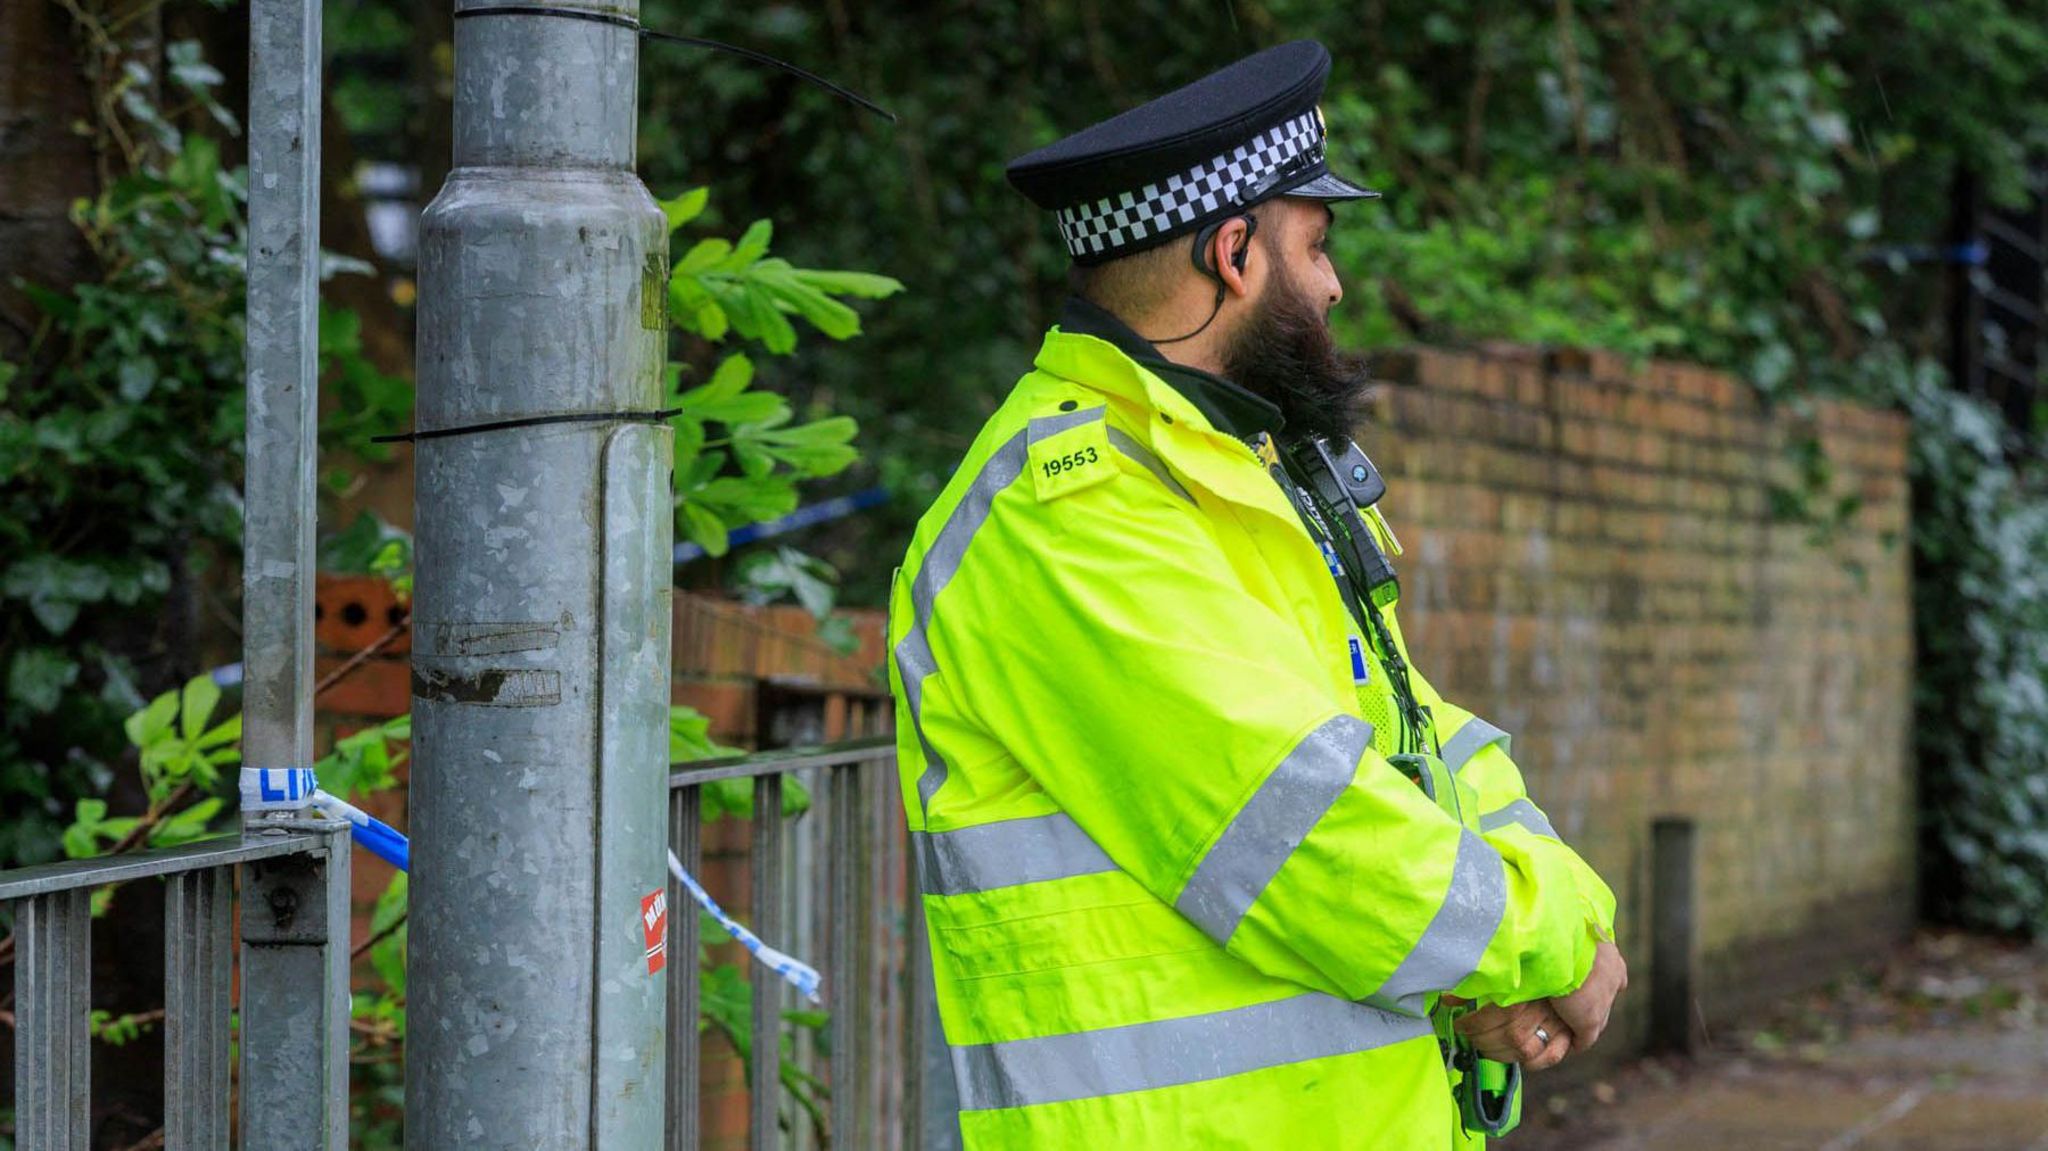 A GMP officer guarding a crime scene in Manchester